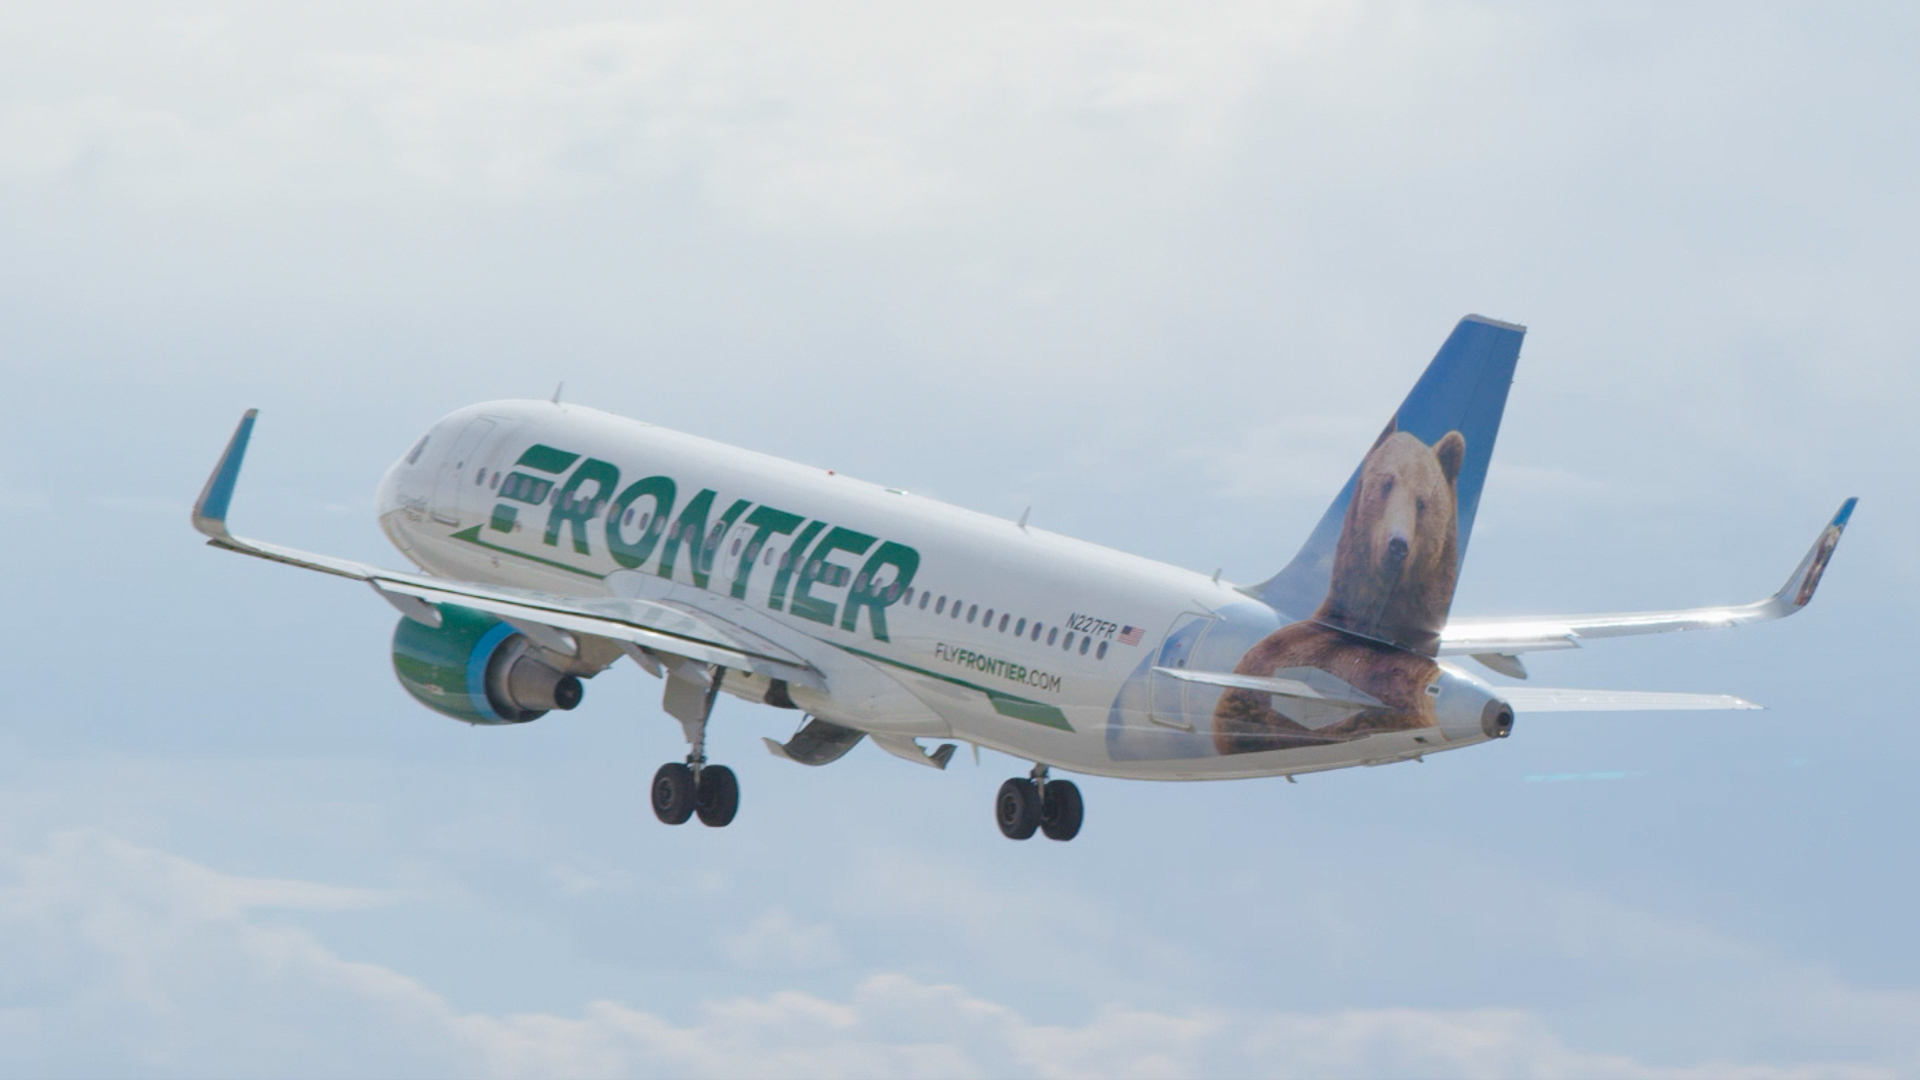 <p>FrontierMiles is the free frequent flyer program for Frontier Airlines. Aside from being rewarded for flying with Frontier, you can earn extra miles through Frontier's partners or by using one of the Frontier Mastercards. If you accrue more than 20,000 miles, you qualify for Elite Status with FrontierMiles, which qualifies you for a free carry-on, stretch seating, and certain fee waivers. You can book cheap airline tickets with as few as 10,000 miles<strong>.</strong></p>